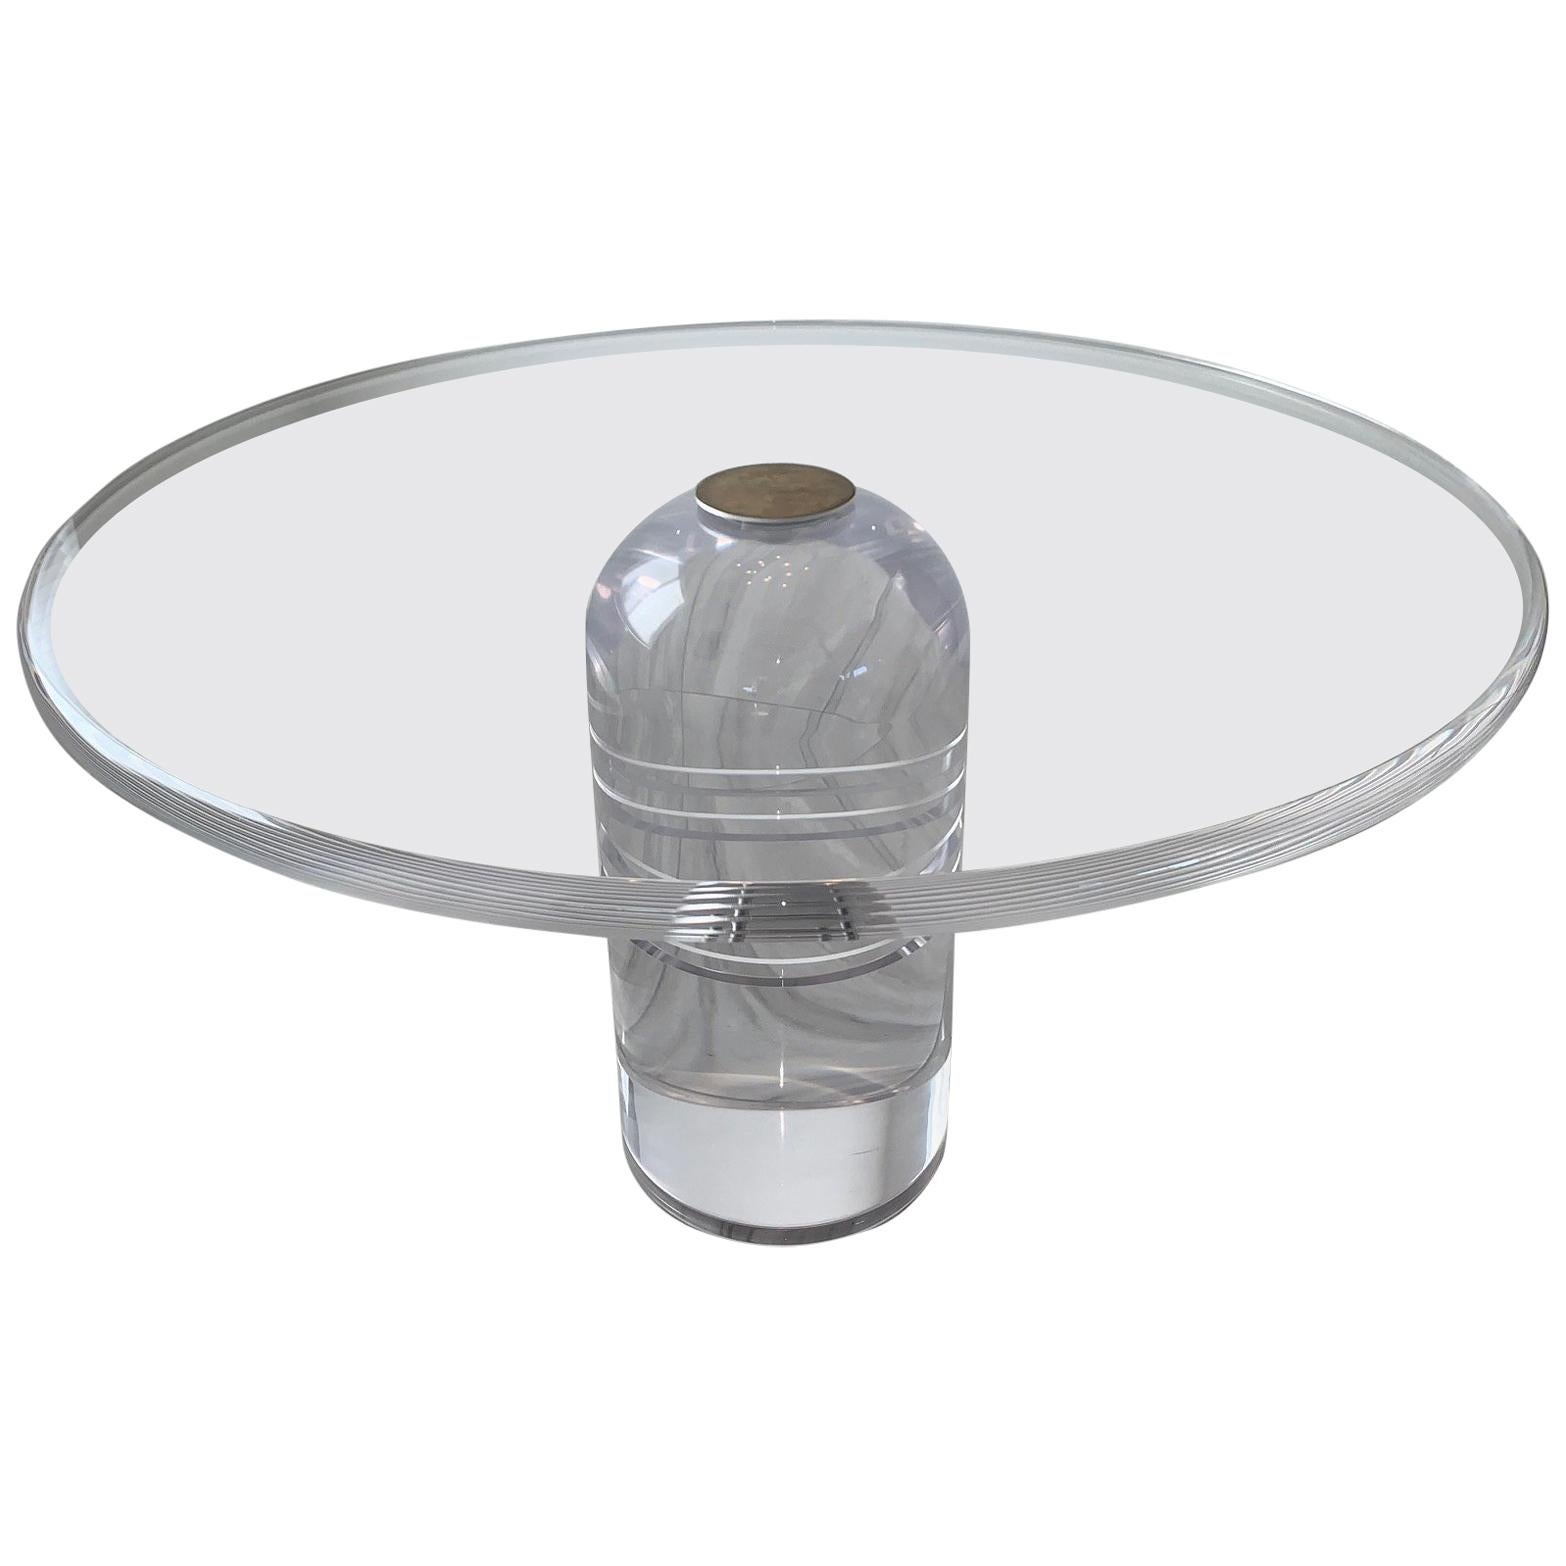 Charles Hollis Jones Rare Le Dome Lucite Dining Table or Circa, 1970s For Sale